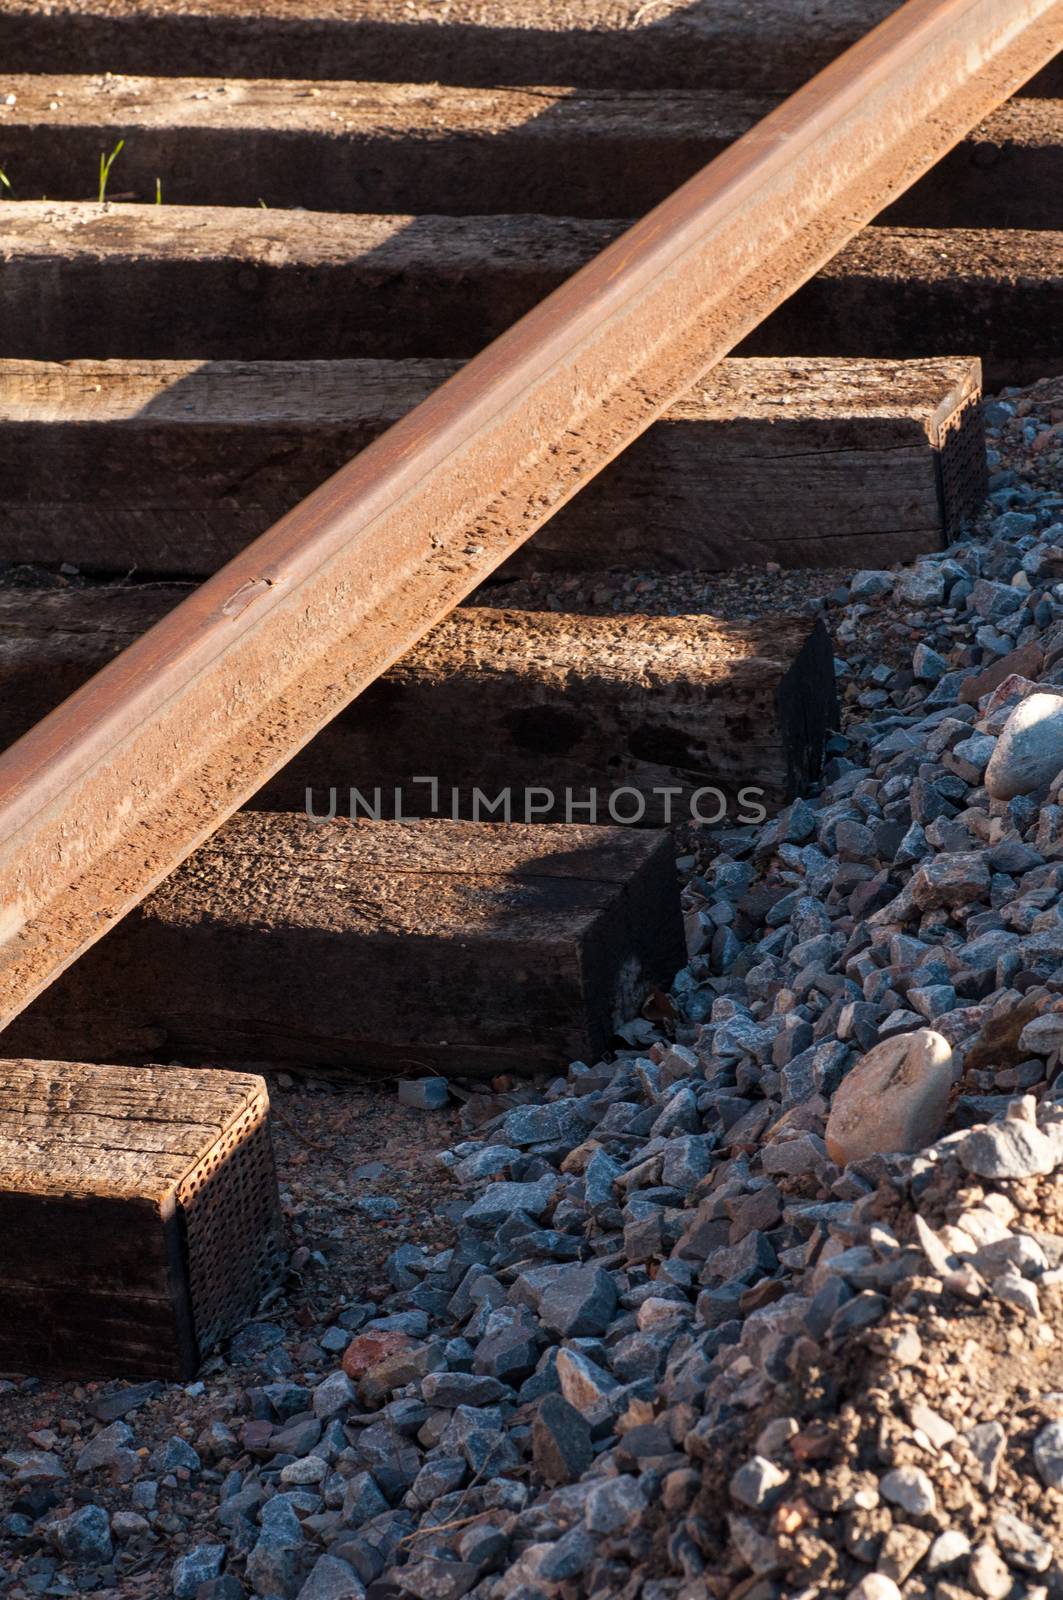 Working on the Railroad by bartystewart